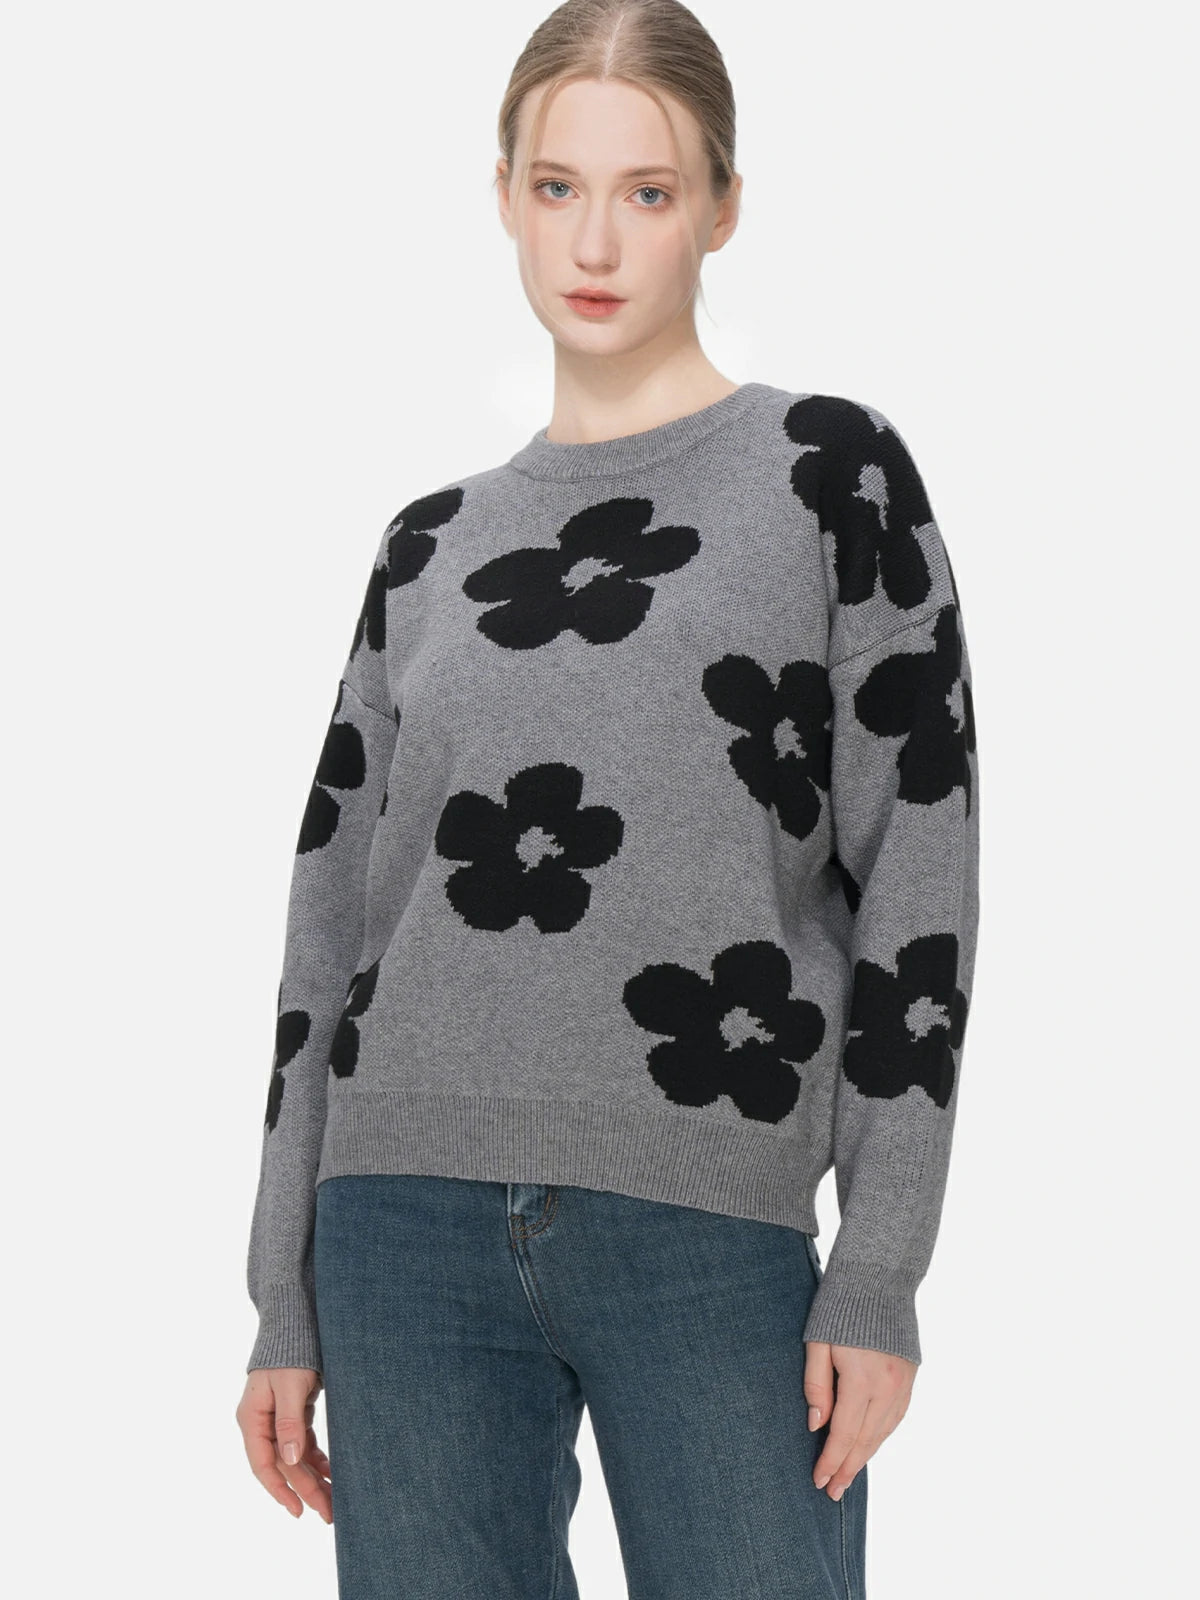 Stylish gray round-neck sweater with a loose-fit design and floral print